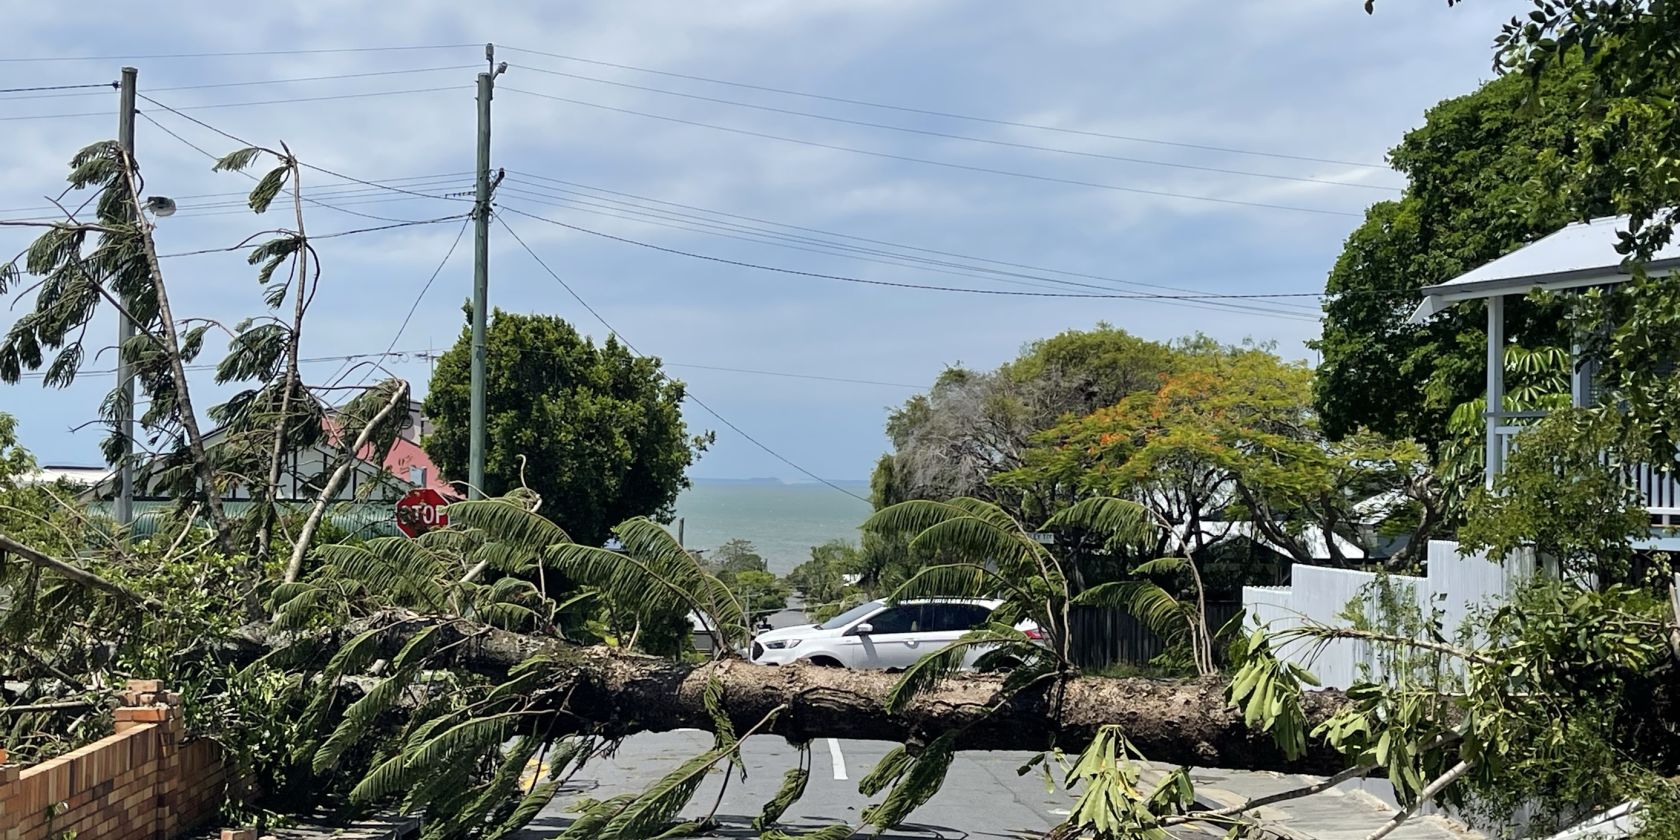 Suncorp assisting following east coast storms